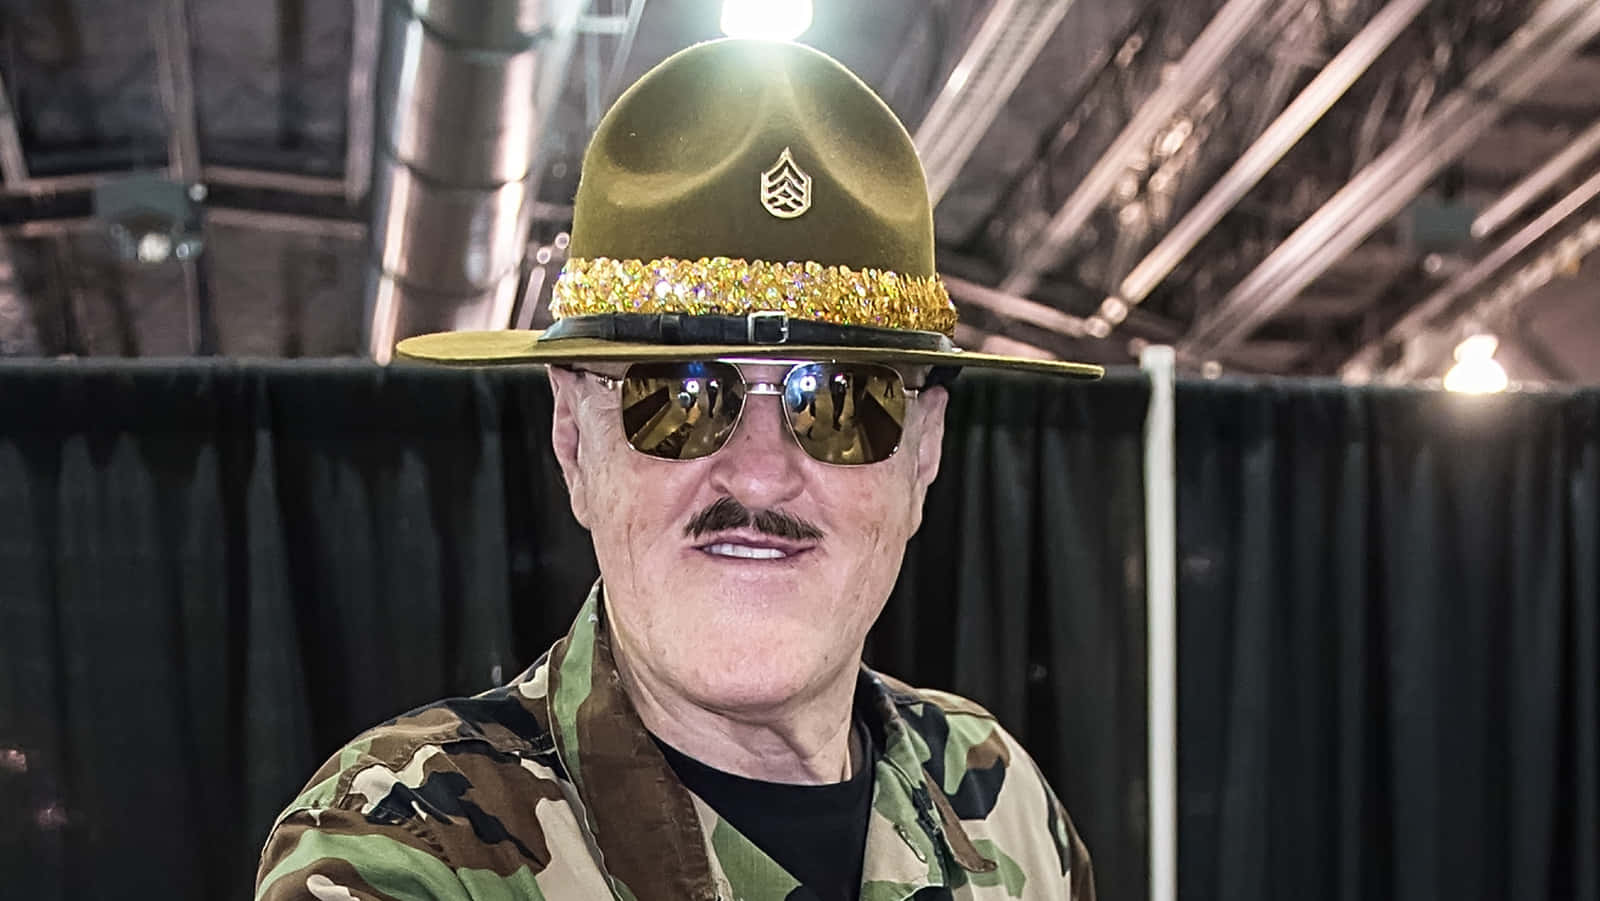 Sgt Slaughter Iconic Wrestling Pioneer Wallpaper